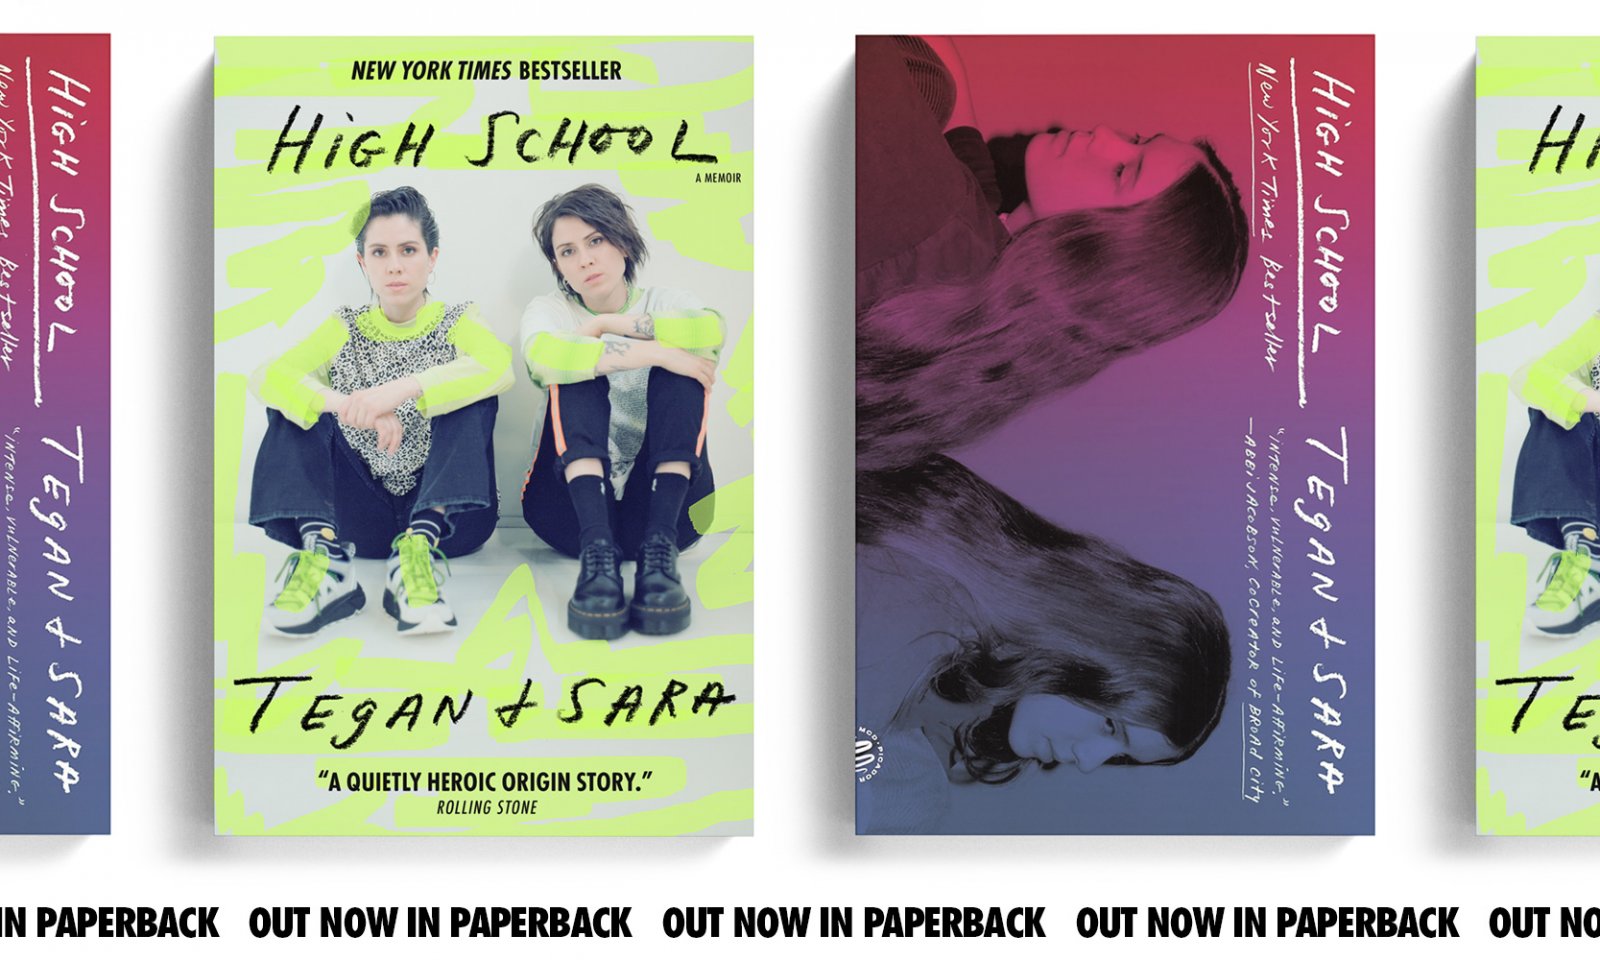 UK and US covers of Tegan and Sara's "High School" book, out now in paperback